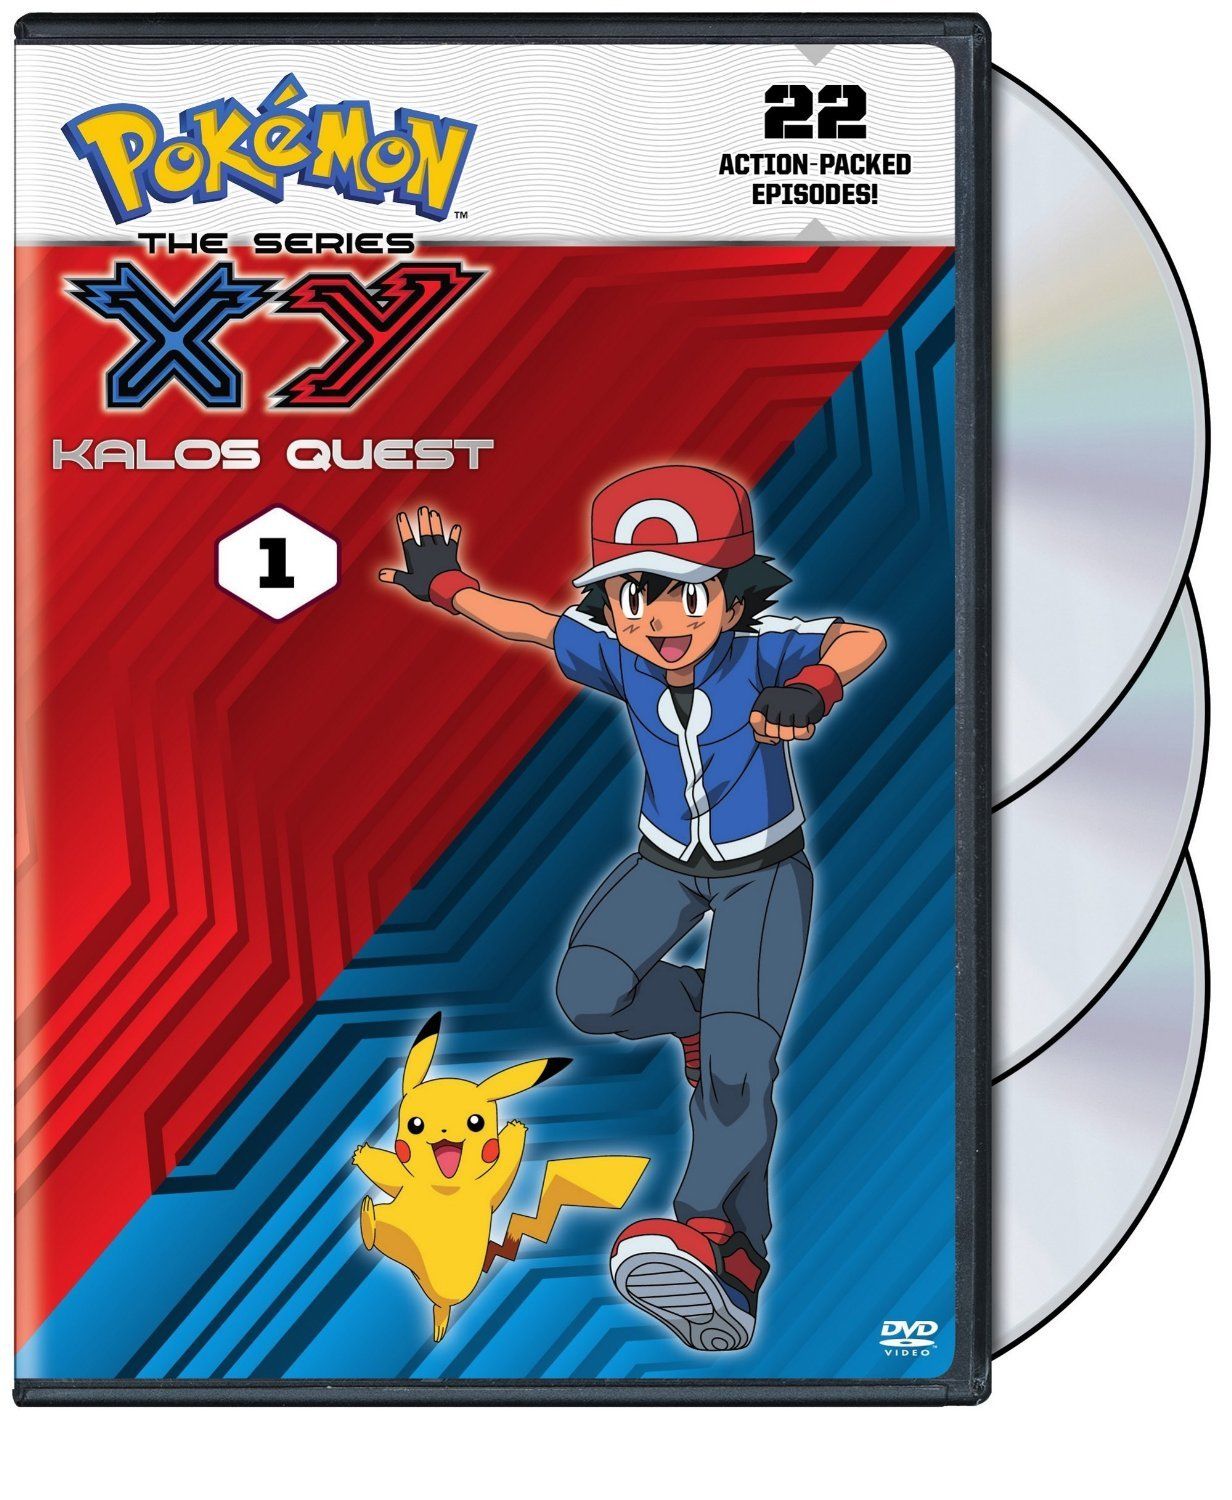 Pokemon Kalos Quest Set 1 Review | Otaku Dome | The Latest News In Anime,  Manga, Gaming, Tech, and Geek Culture